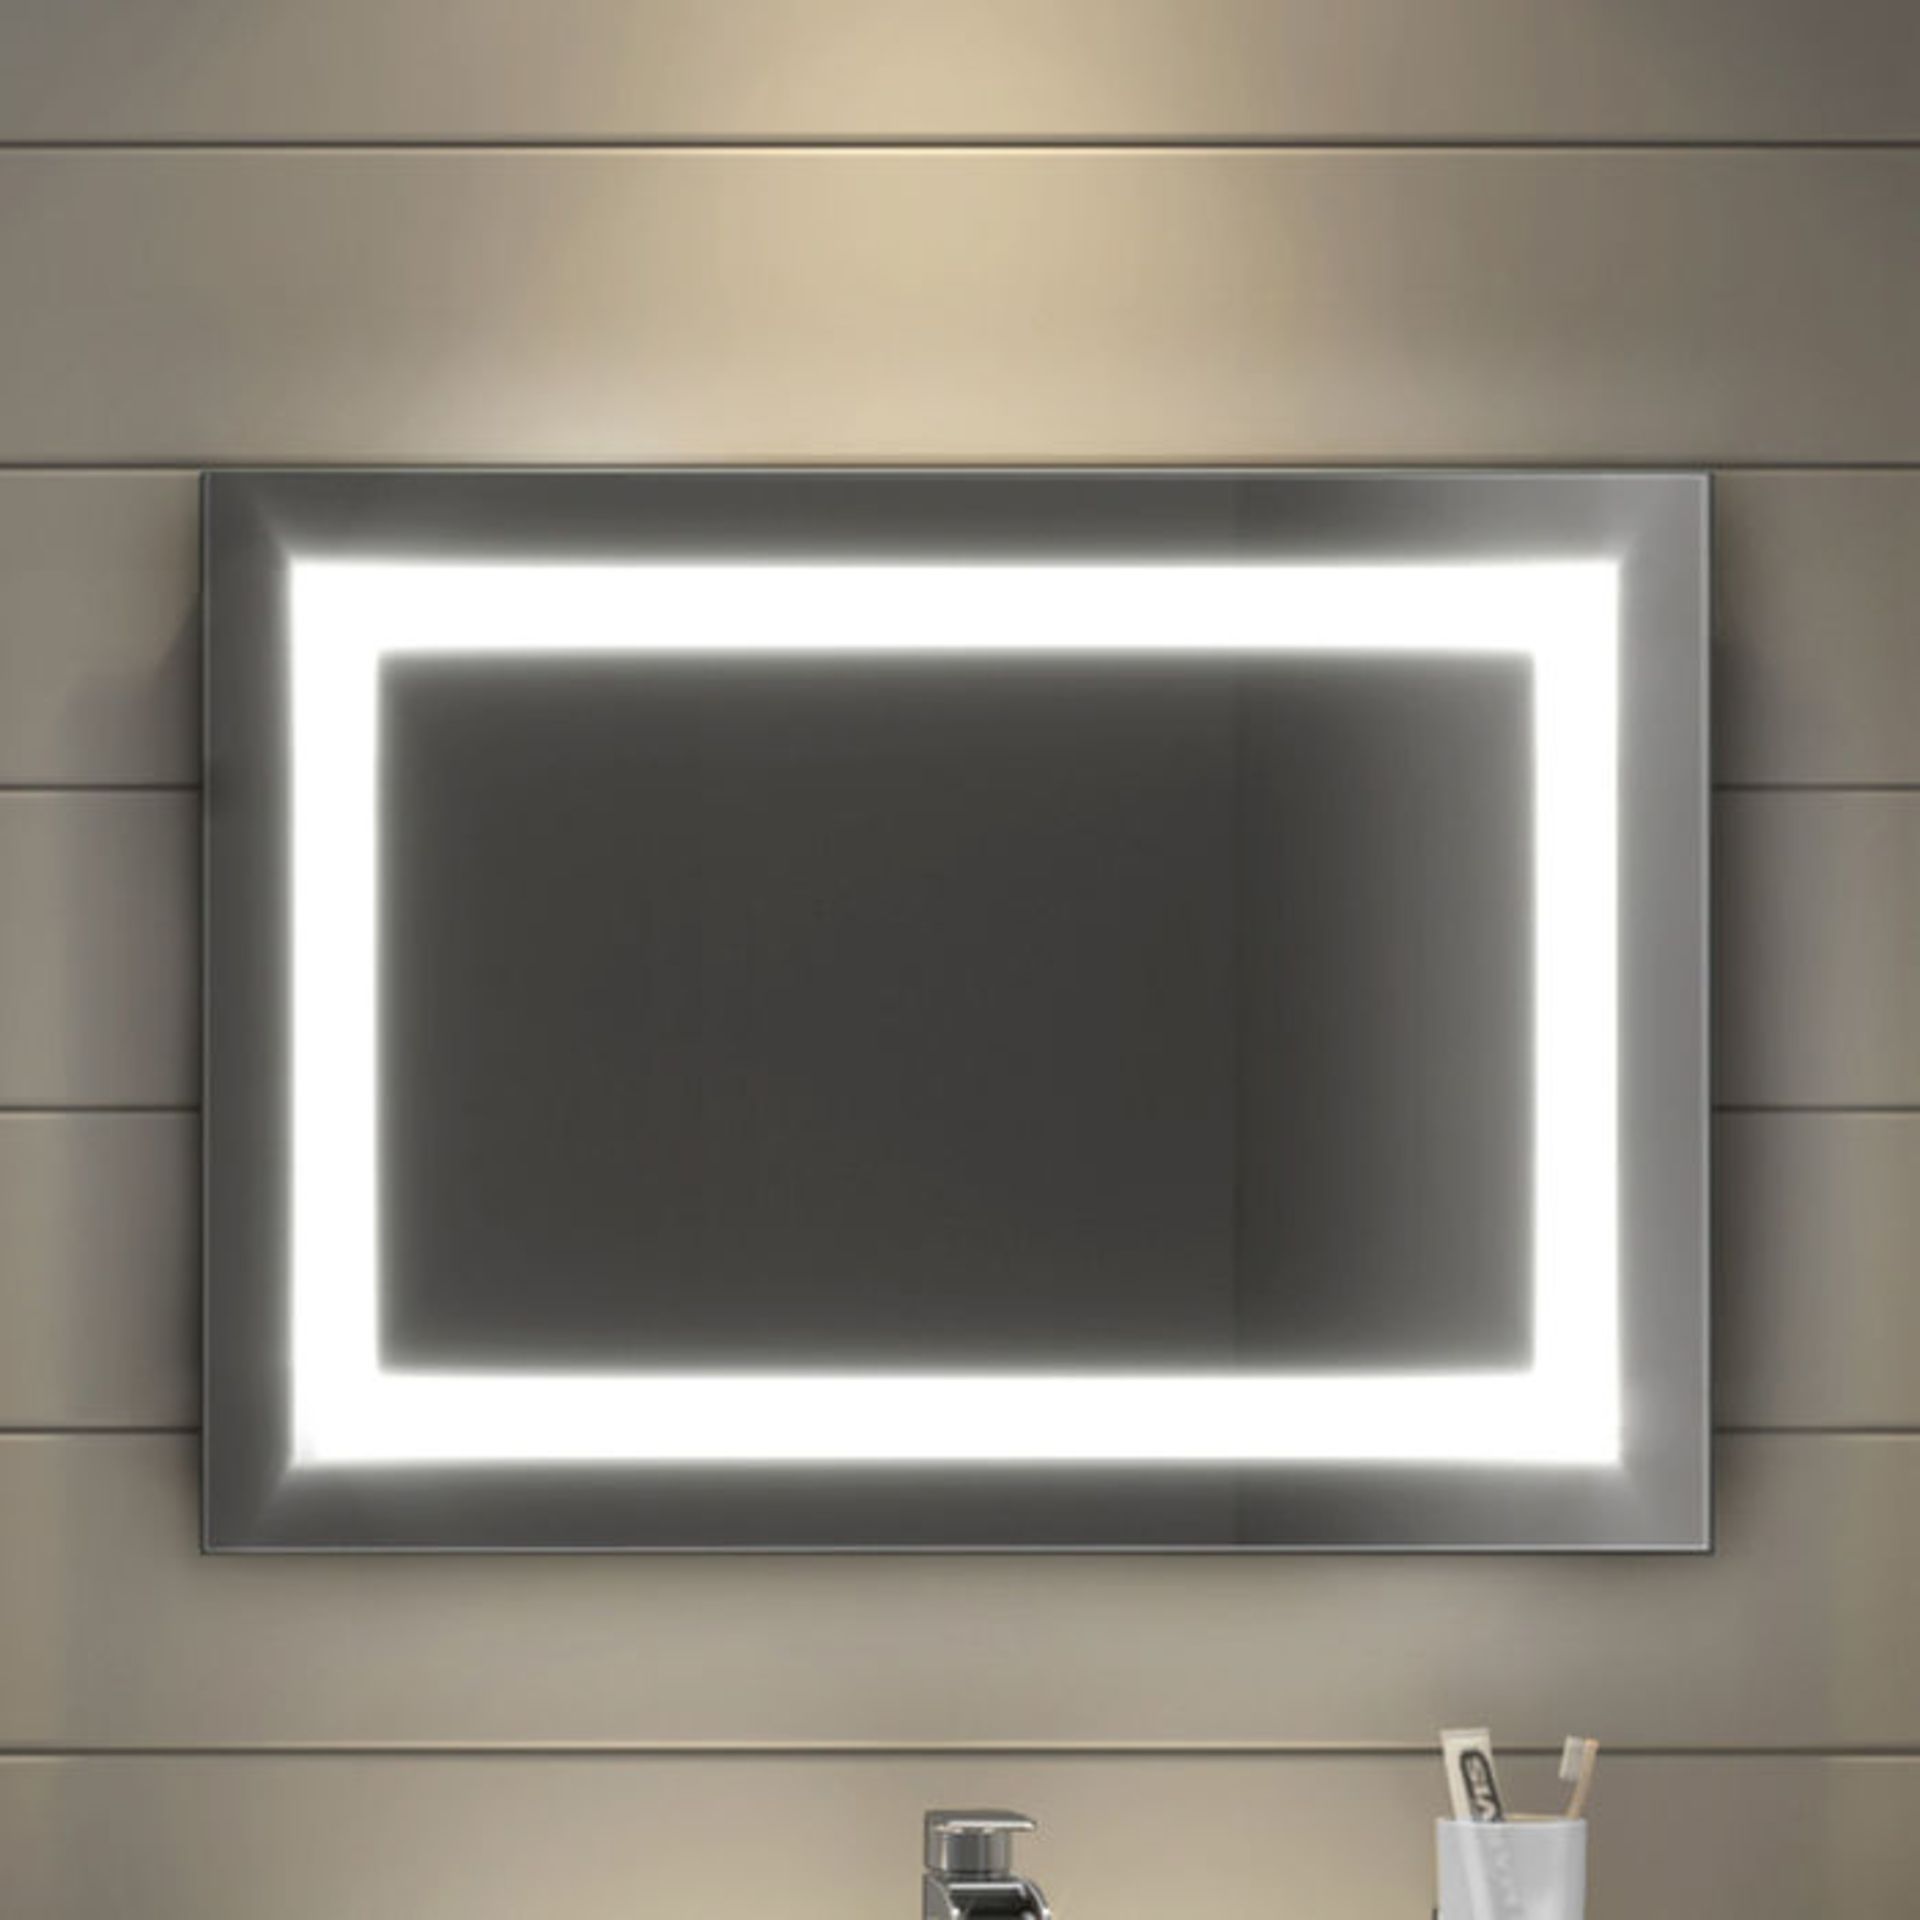 (AL224) 500x700mm Nova Illuminated LED Mirror. RRP £349.99. We love this because it is the perfect